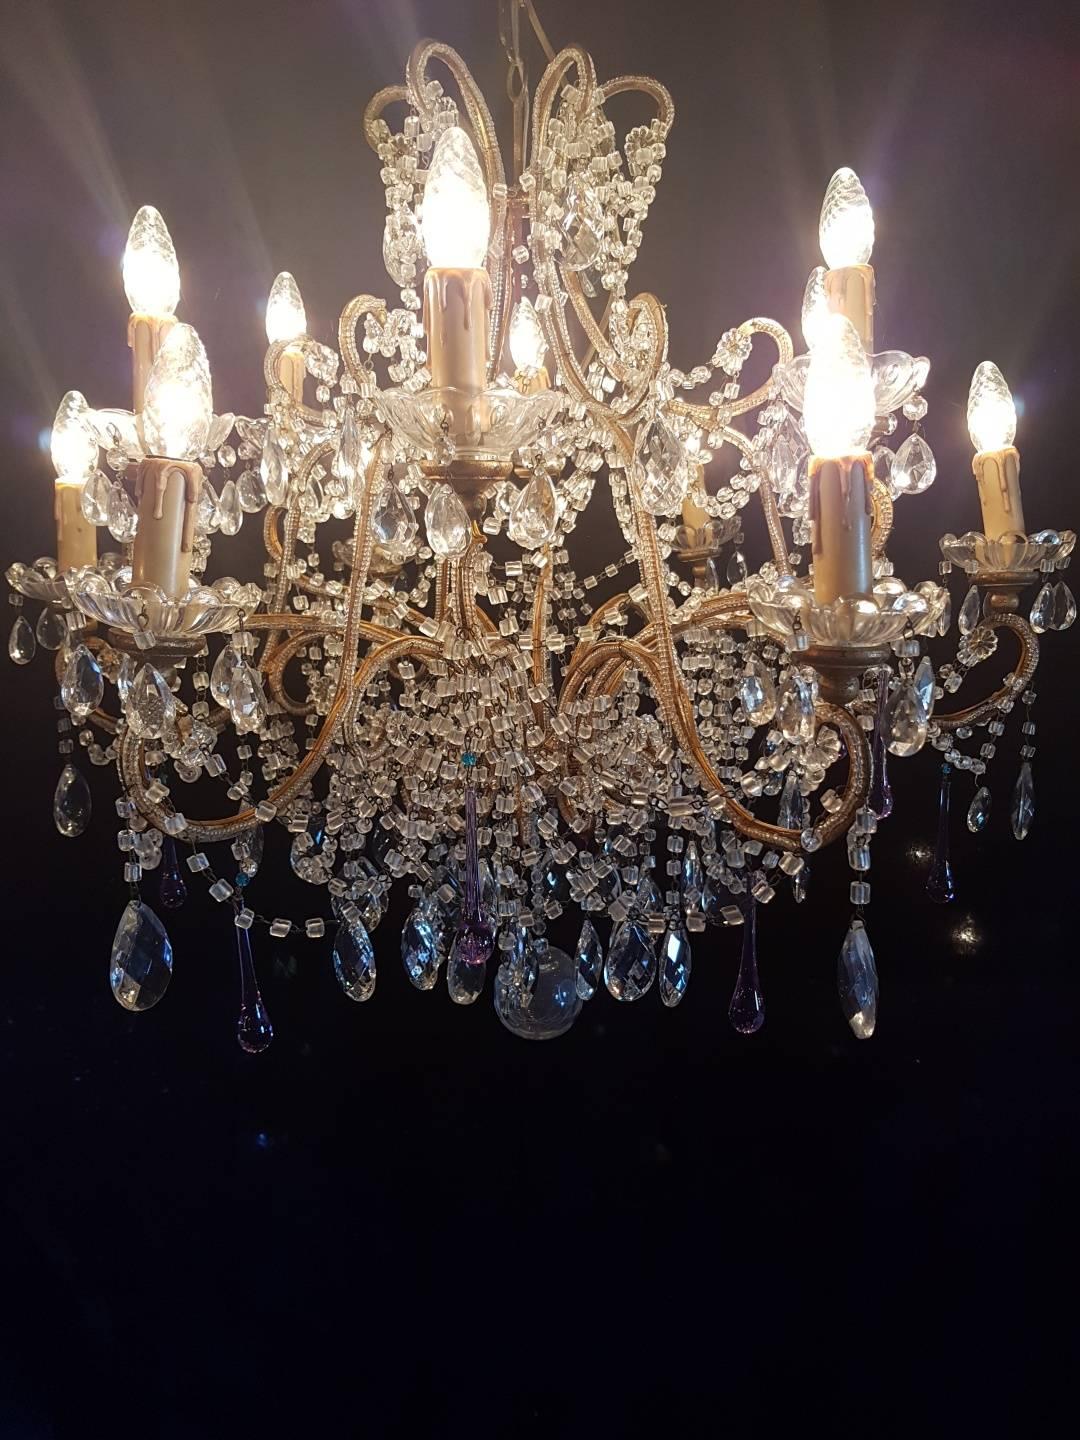 Italian gilt iron chandelier with 12 arms. Gilt iron frame is covered with beads. The bobeches with candle lights are being carried by wood. A few light purple glass drops with a blue bead are giving a really nice effect to the chandelier. The